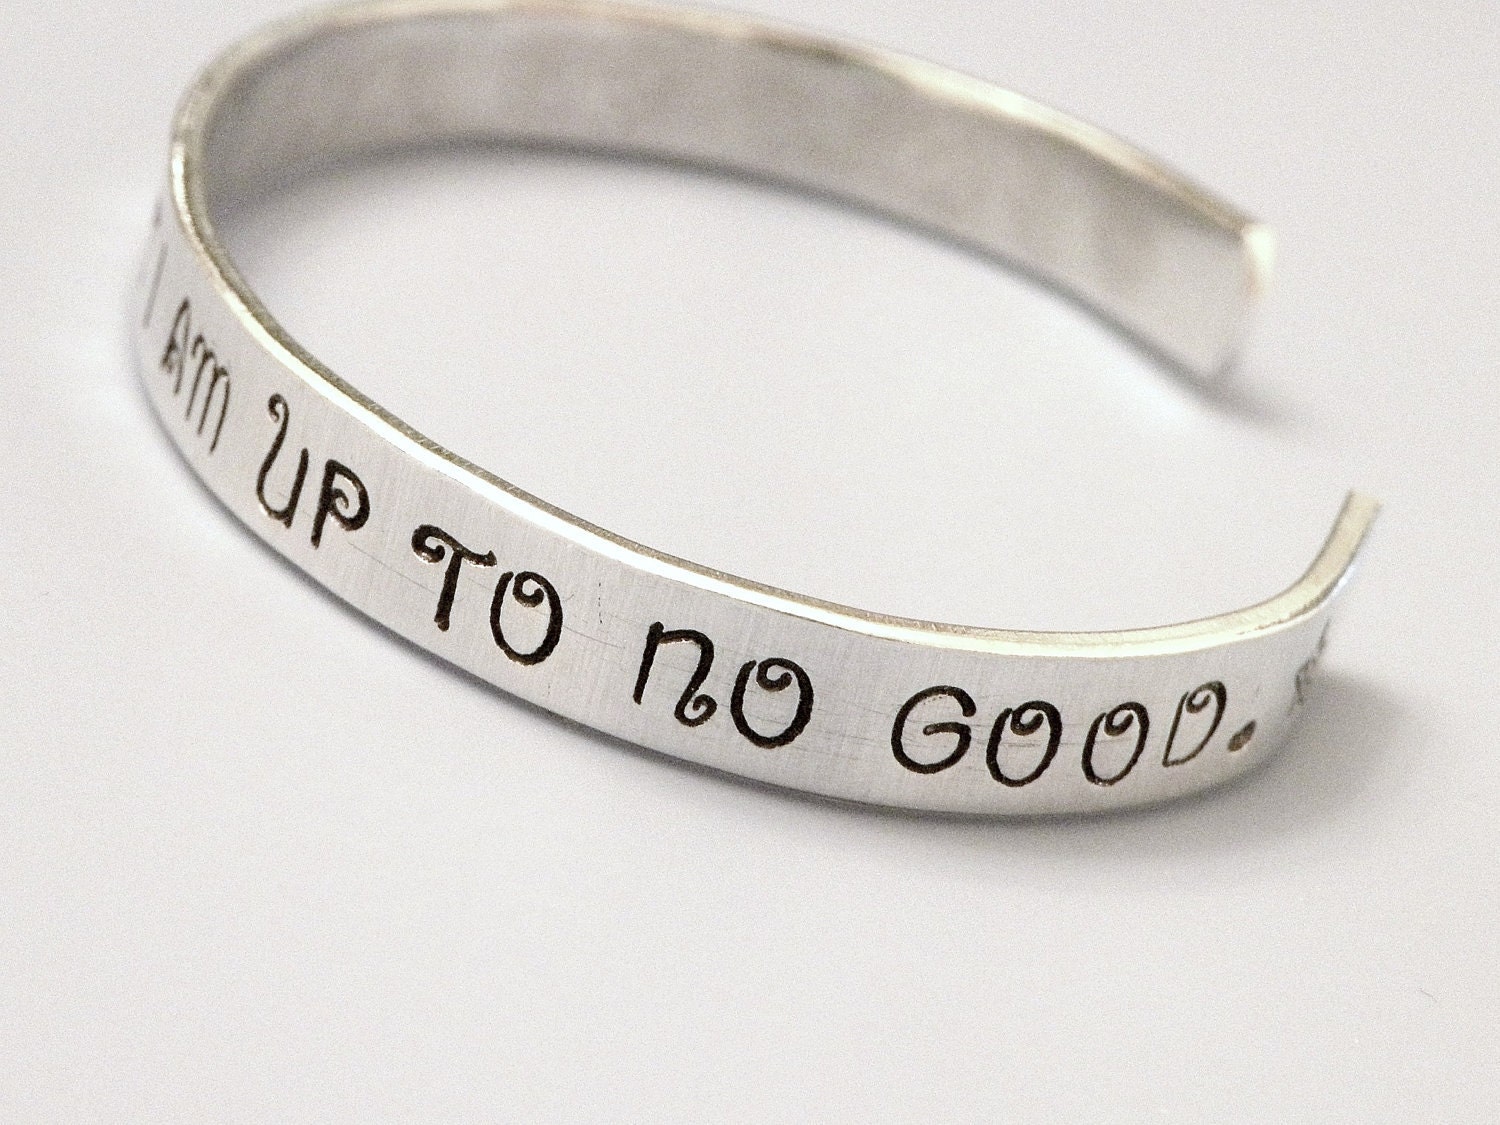 Stamped Harry Potter Solemnly Swear No Good Custom Silver Metal Thin Cuff Bracelet